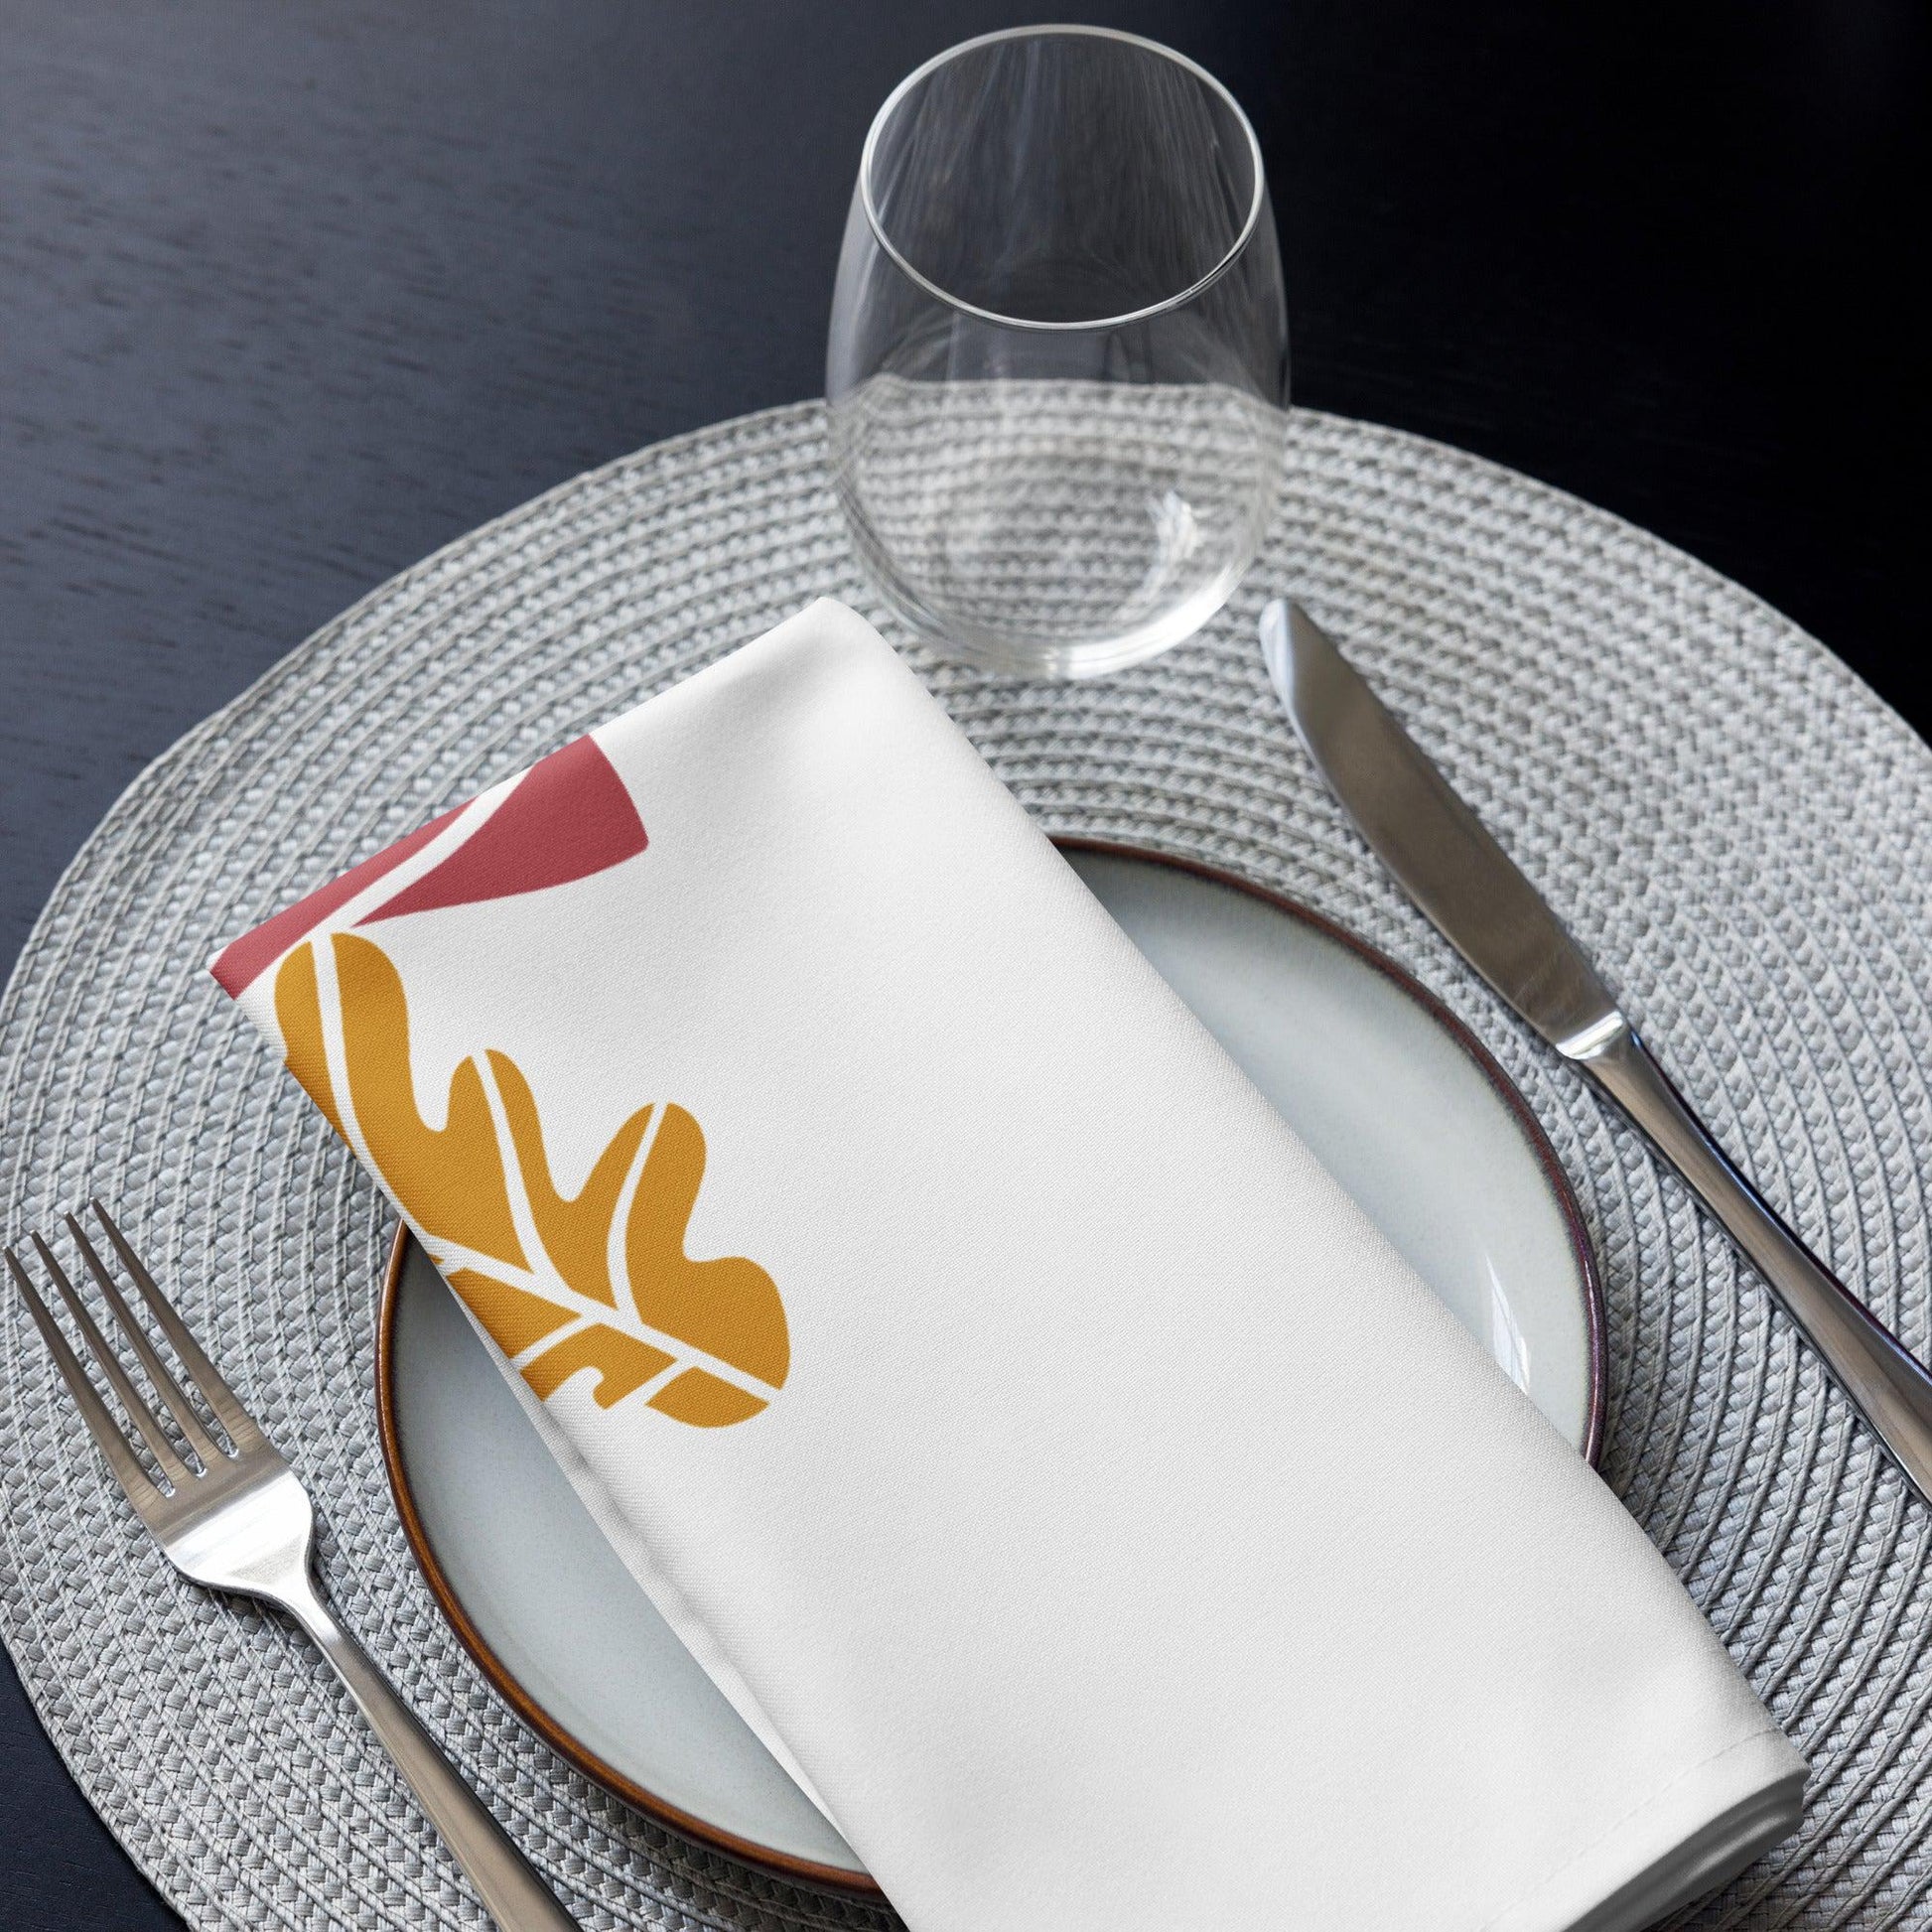 Harvest Charm: Exquisite Cloth Napkin Set Celebrating the Fall Season – Elevate Your Dining Experience